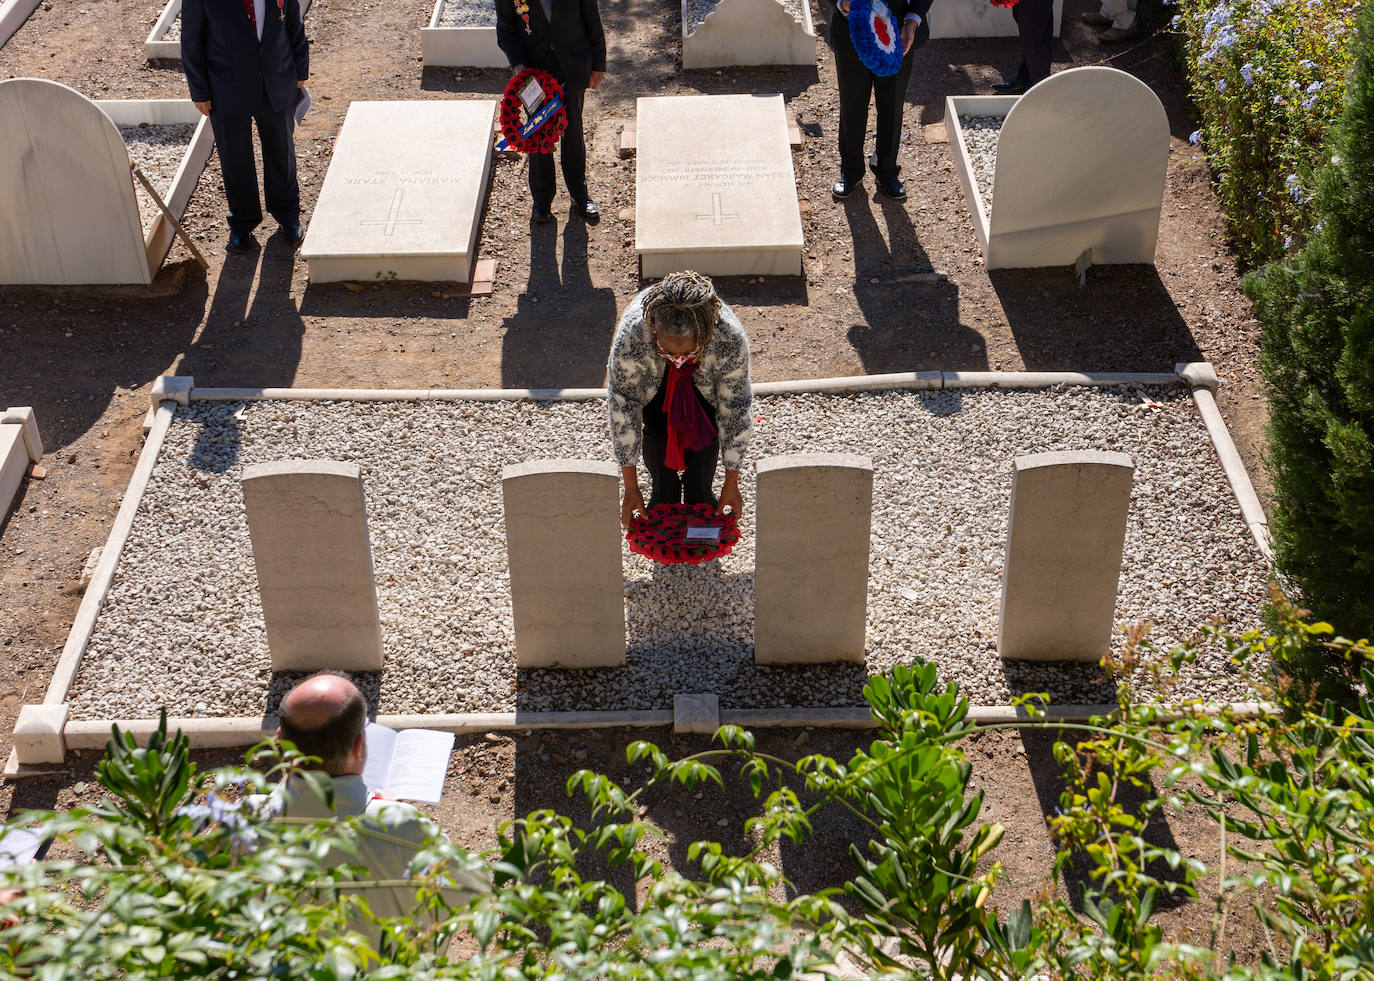 Wreaths were laid by the British consul and representatives of the Royal British Legion and the Royal Air Forces Association.